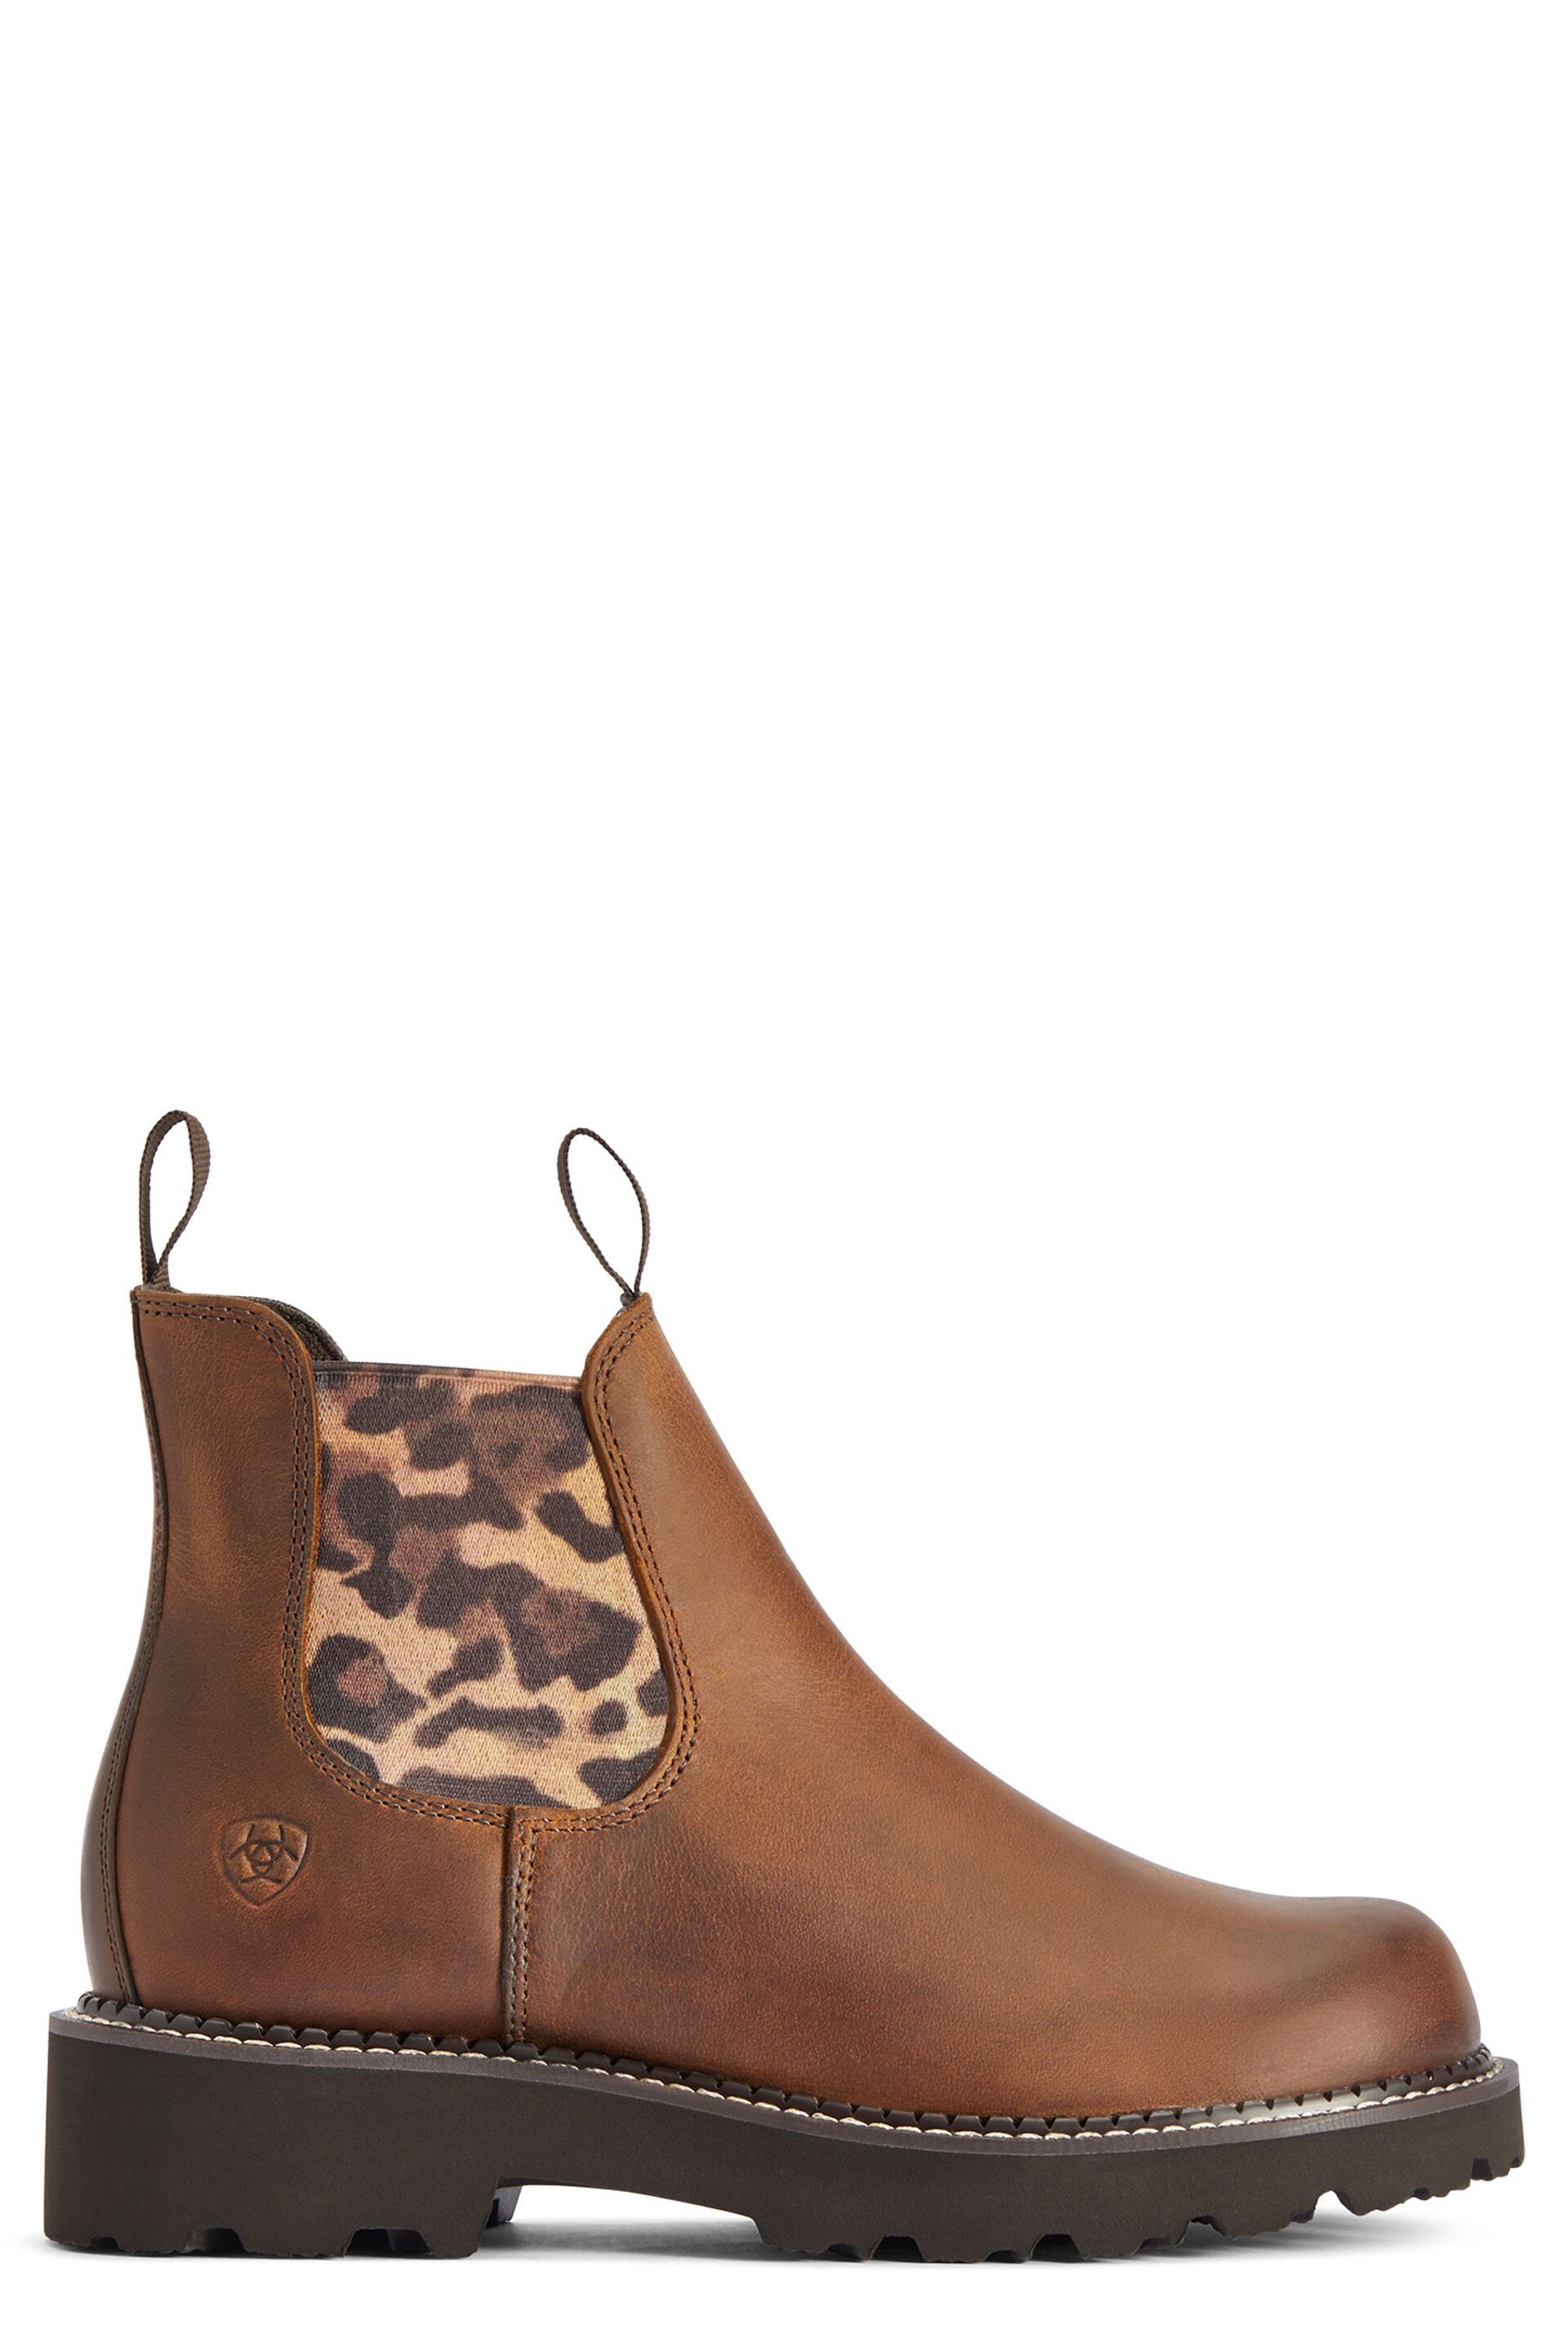 Ariat Fatbaby Twin Gore Brown Boots - Image 1 of 4